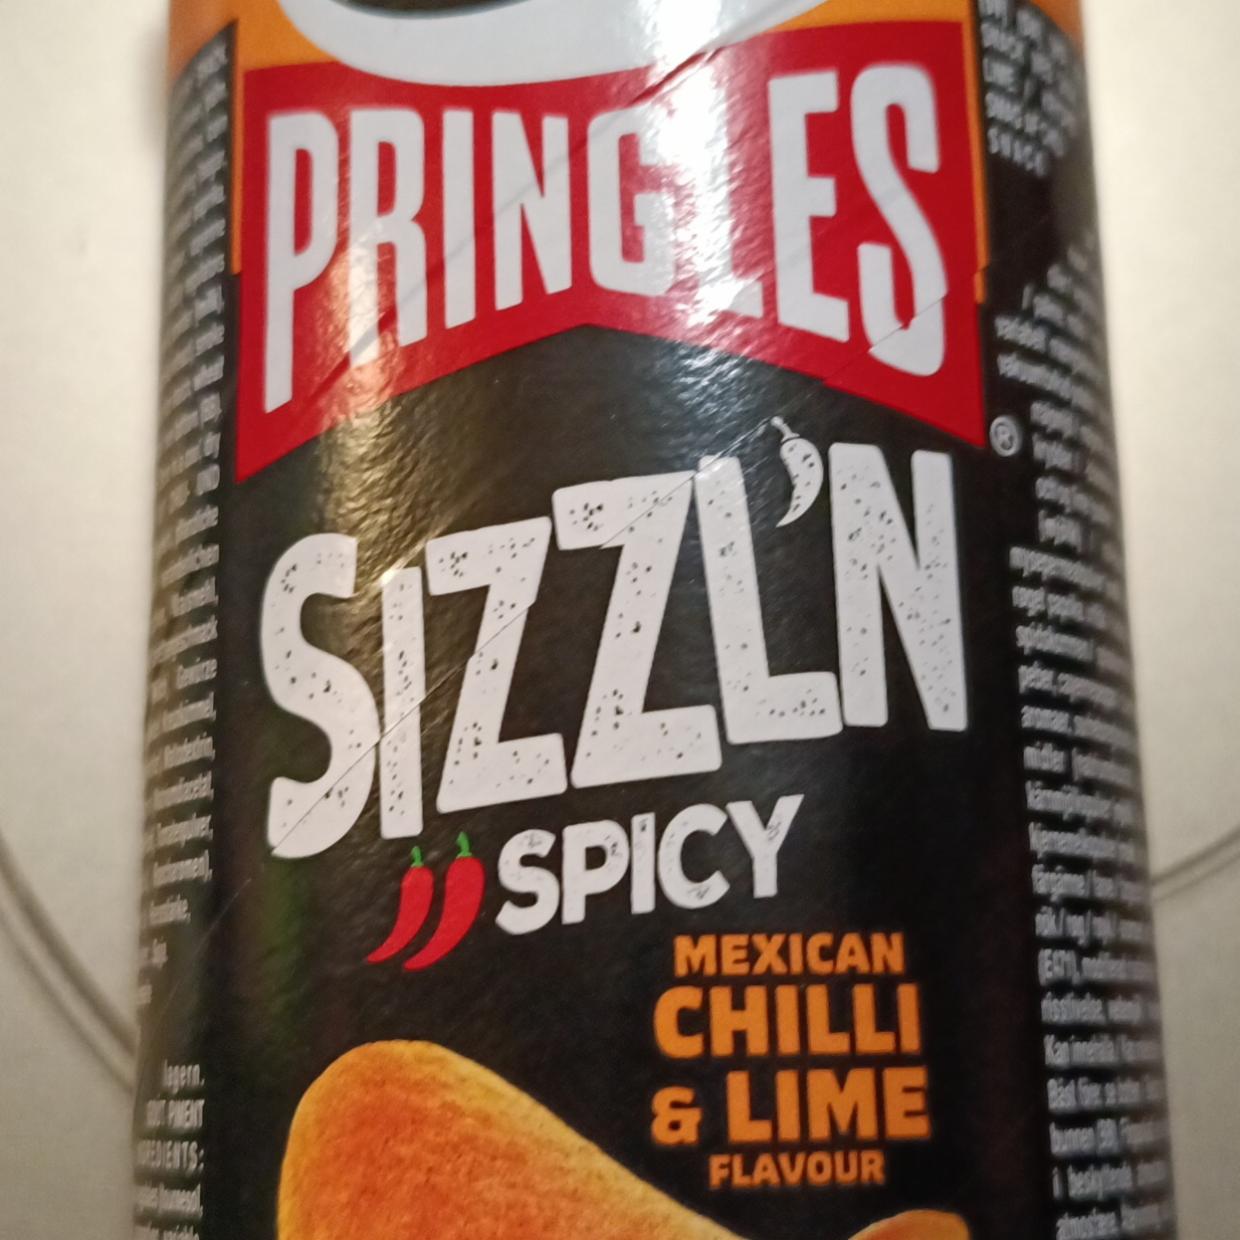 Fotografie - Sizzl'n spicy Mexican Chilli & Lime flavour Pringles